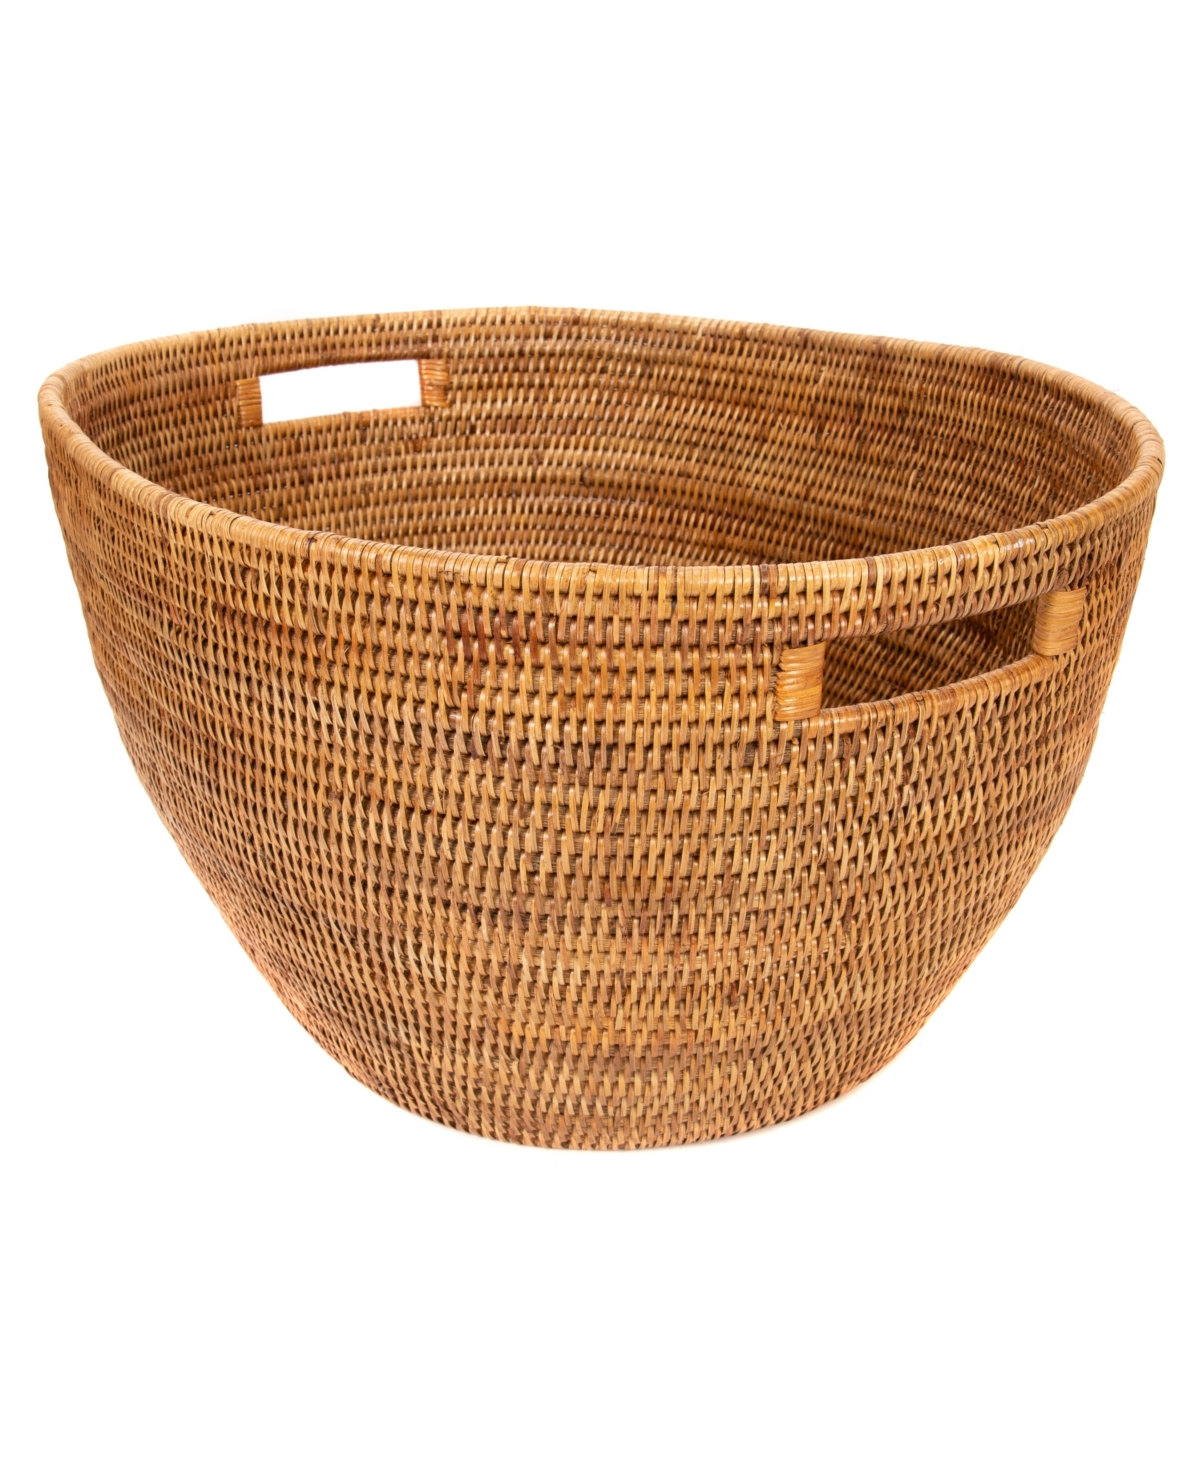 Artifacts Trading Company Artifacts Rattan Laundry Basket In Honey Brown